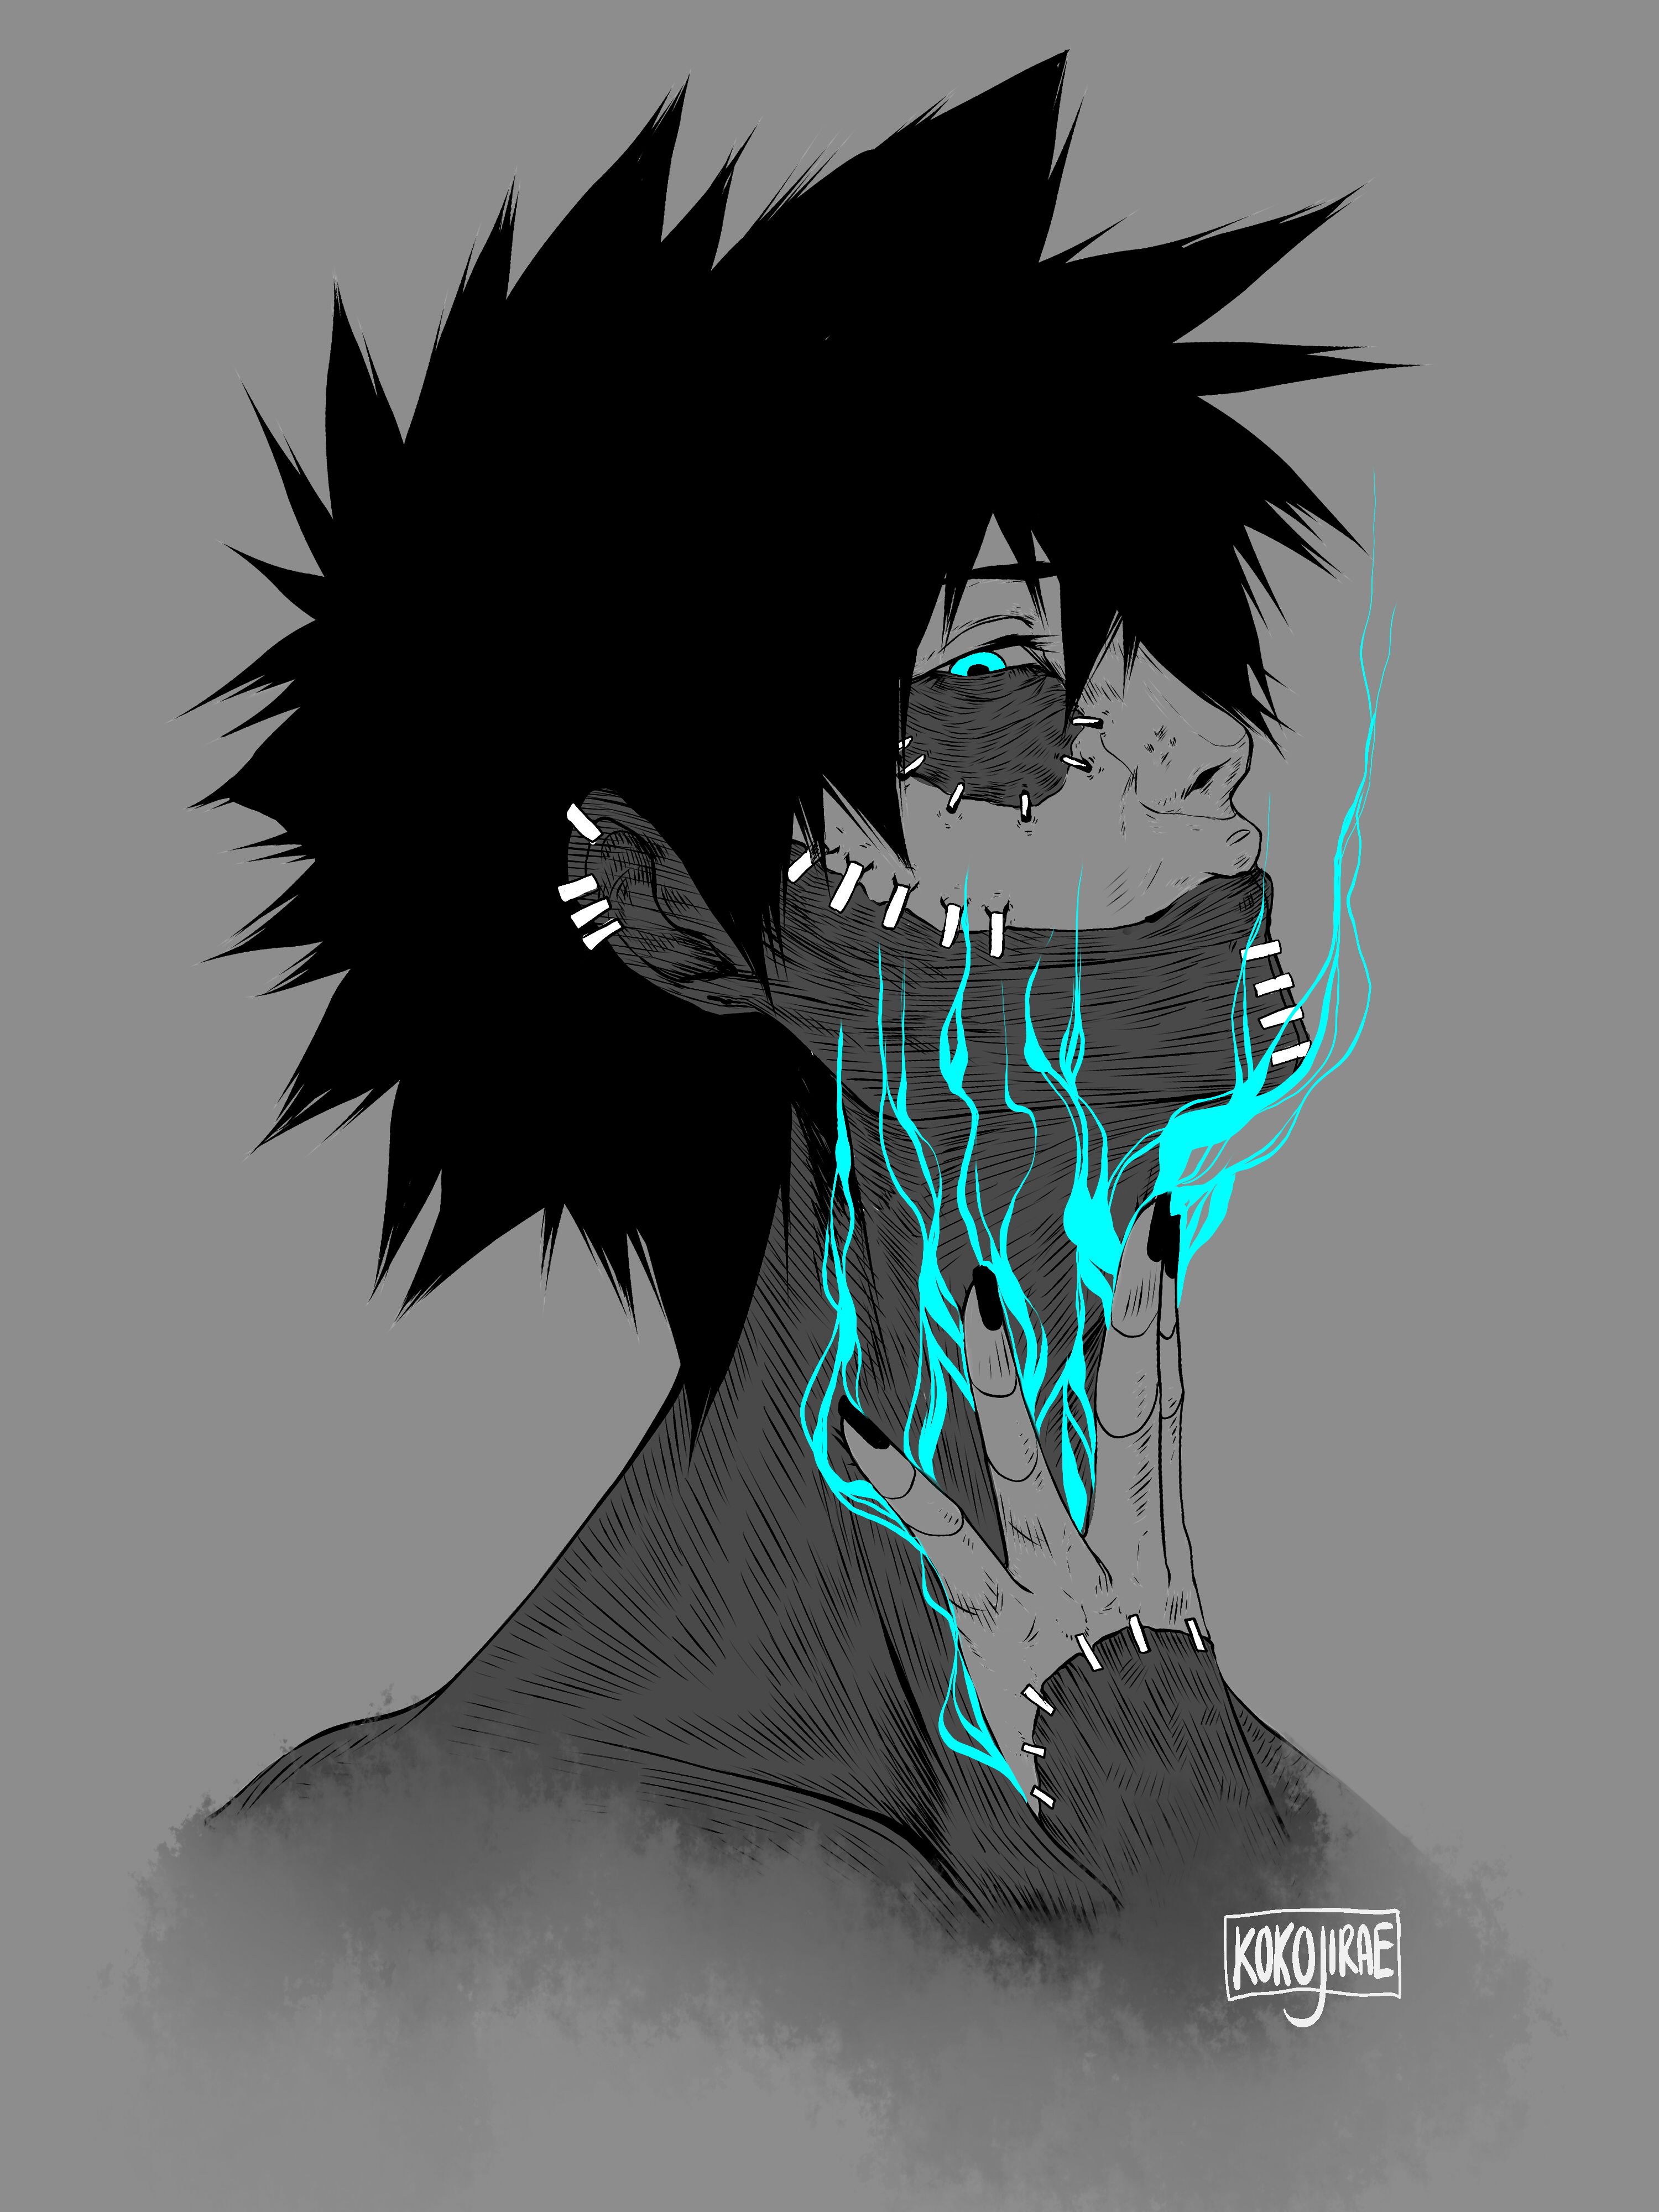 So, i thought Dabi would suit my style alot. Also, first post, yay